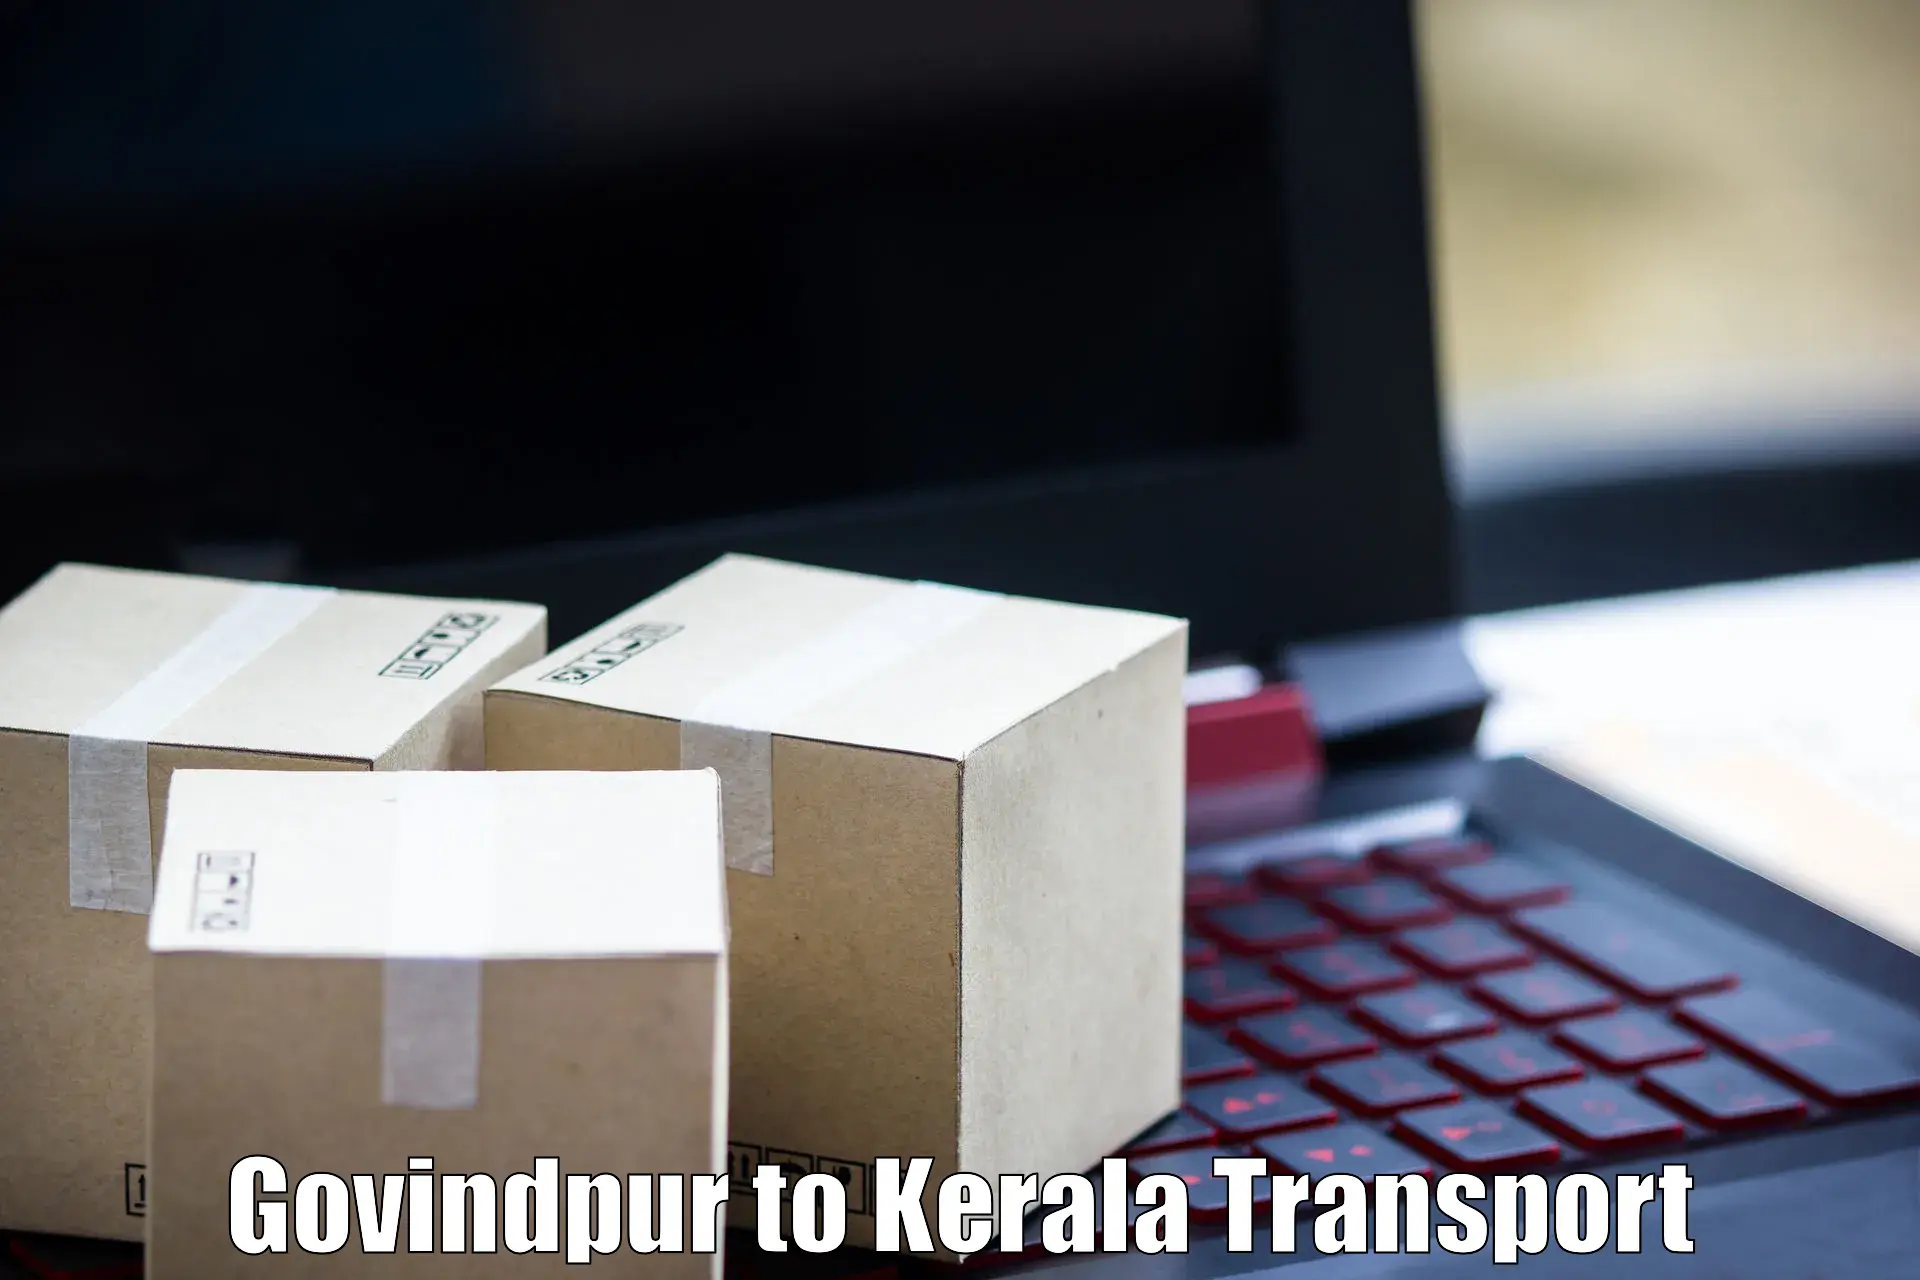 Commercial transport service Govindpur to Cochin University of Science and Technology